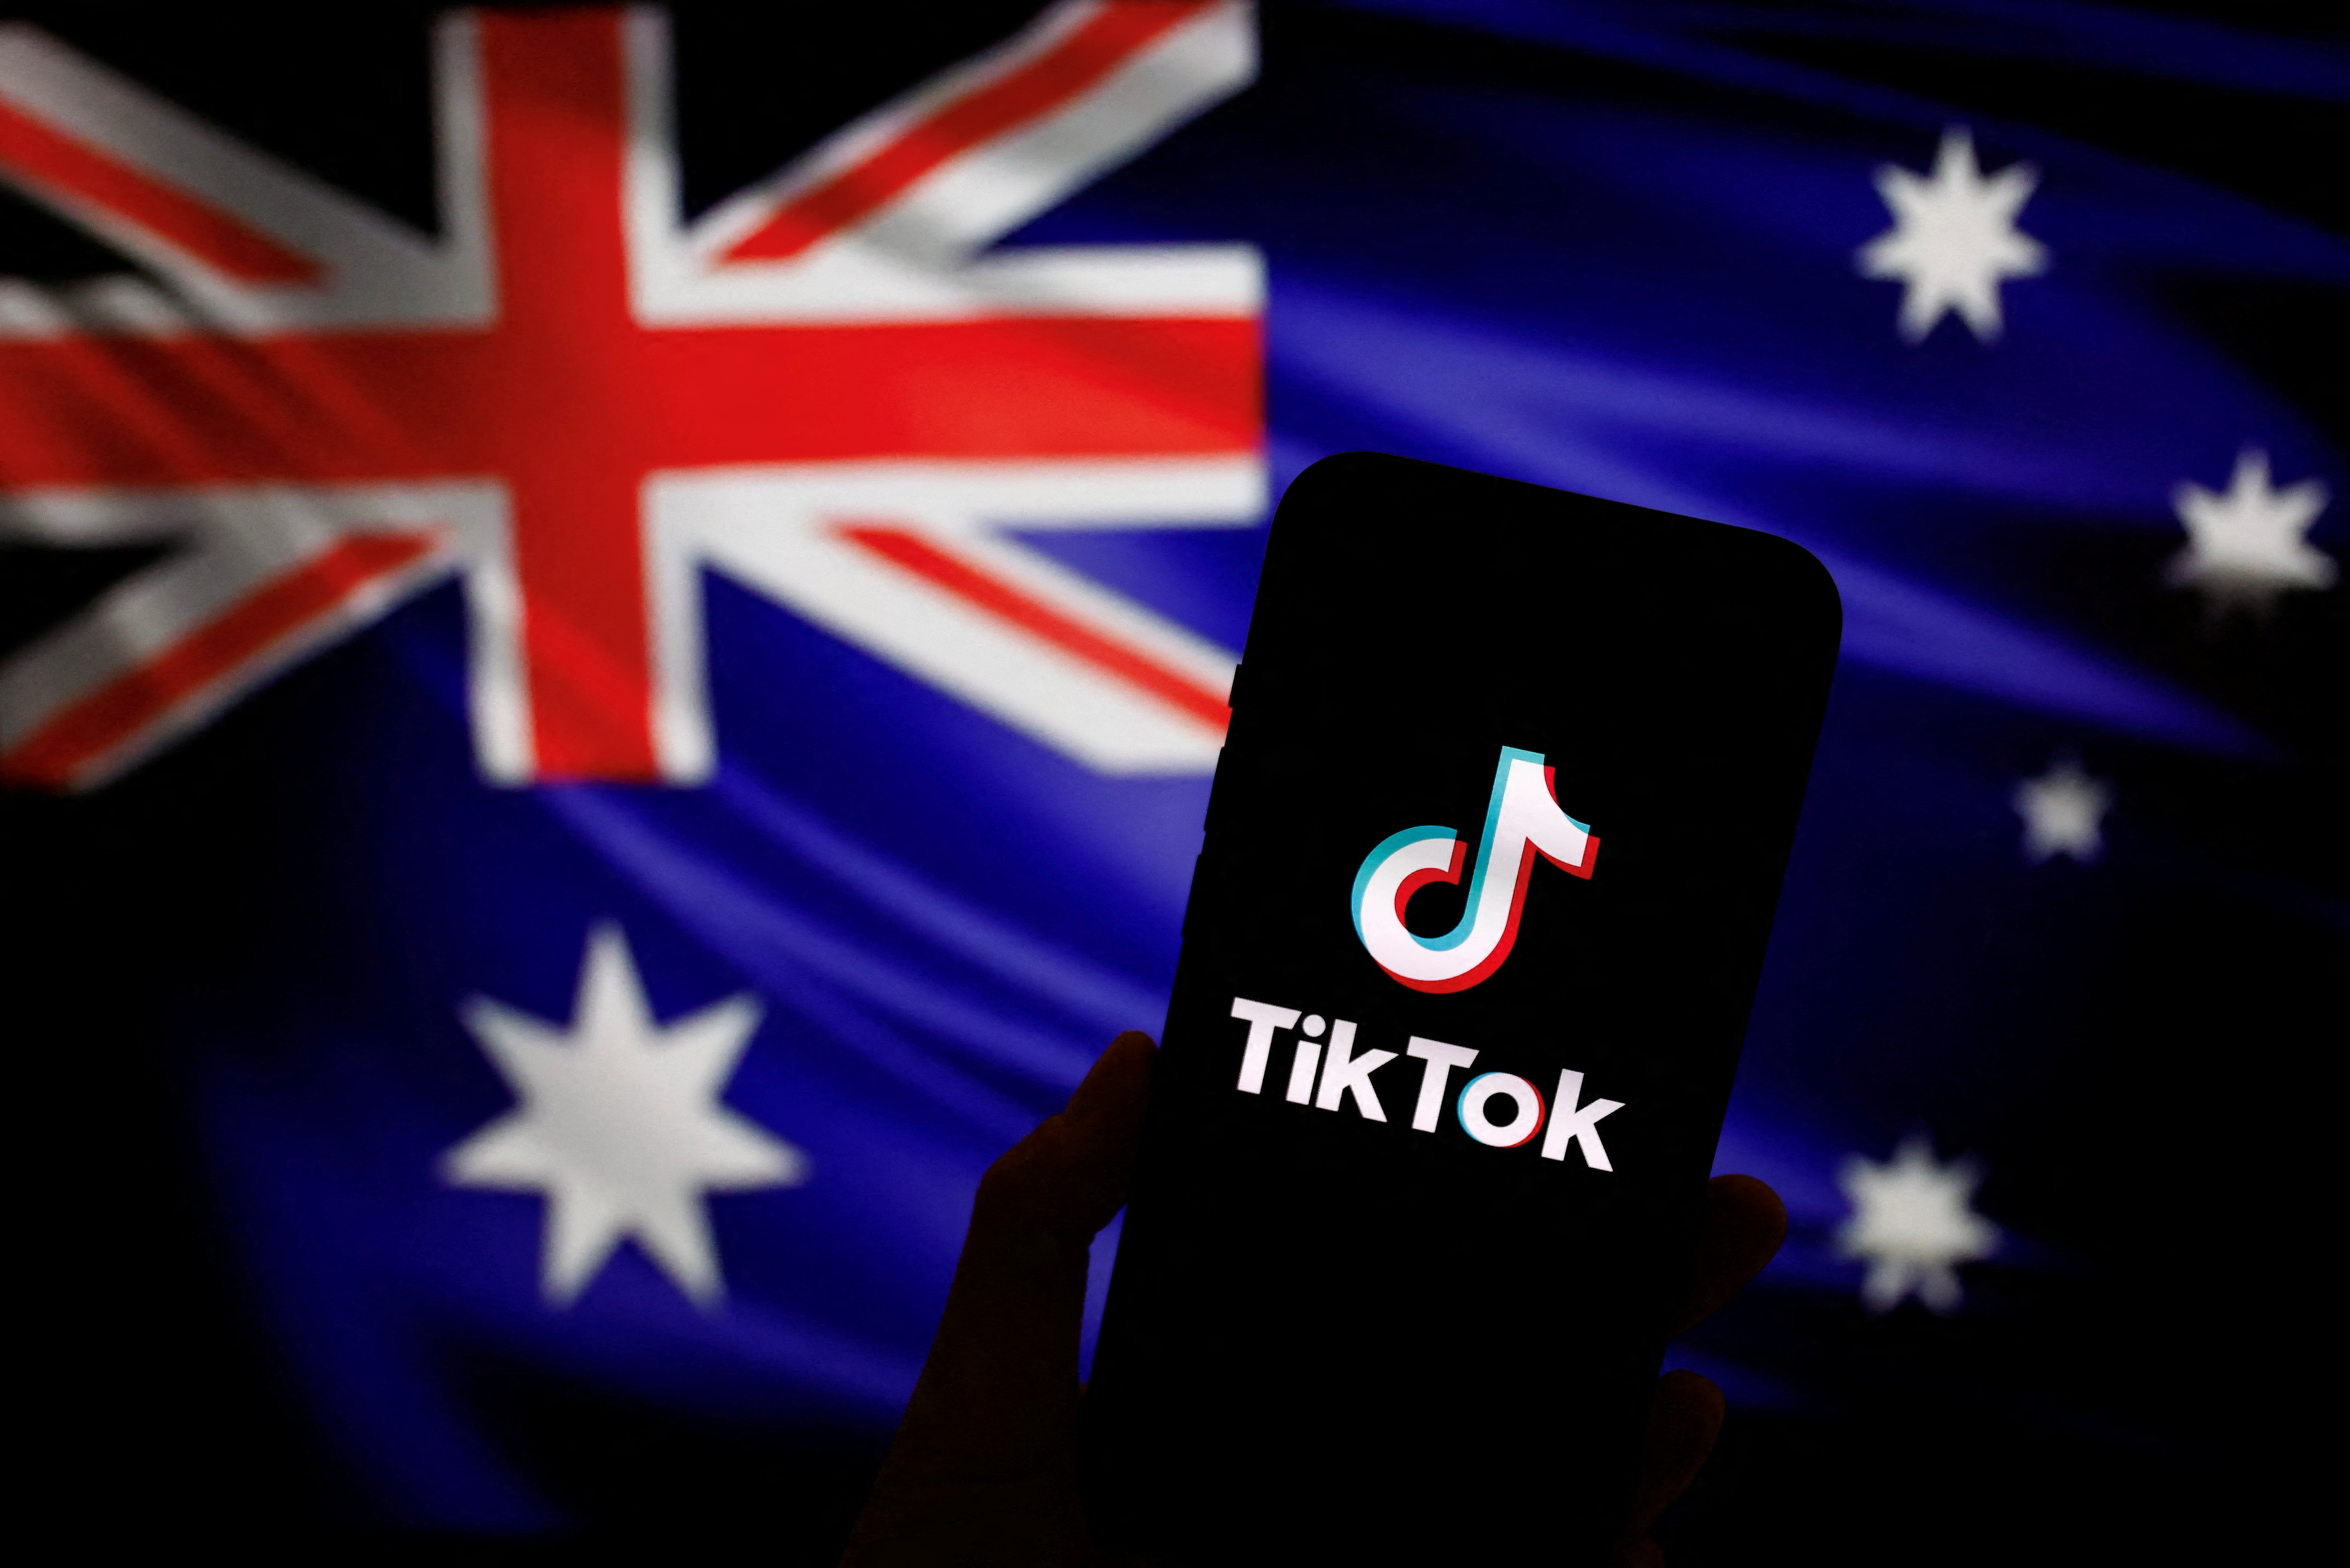 TikTok's Data Center Locations and use of Oracle Cloud - Dgtl Infra